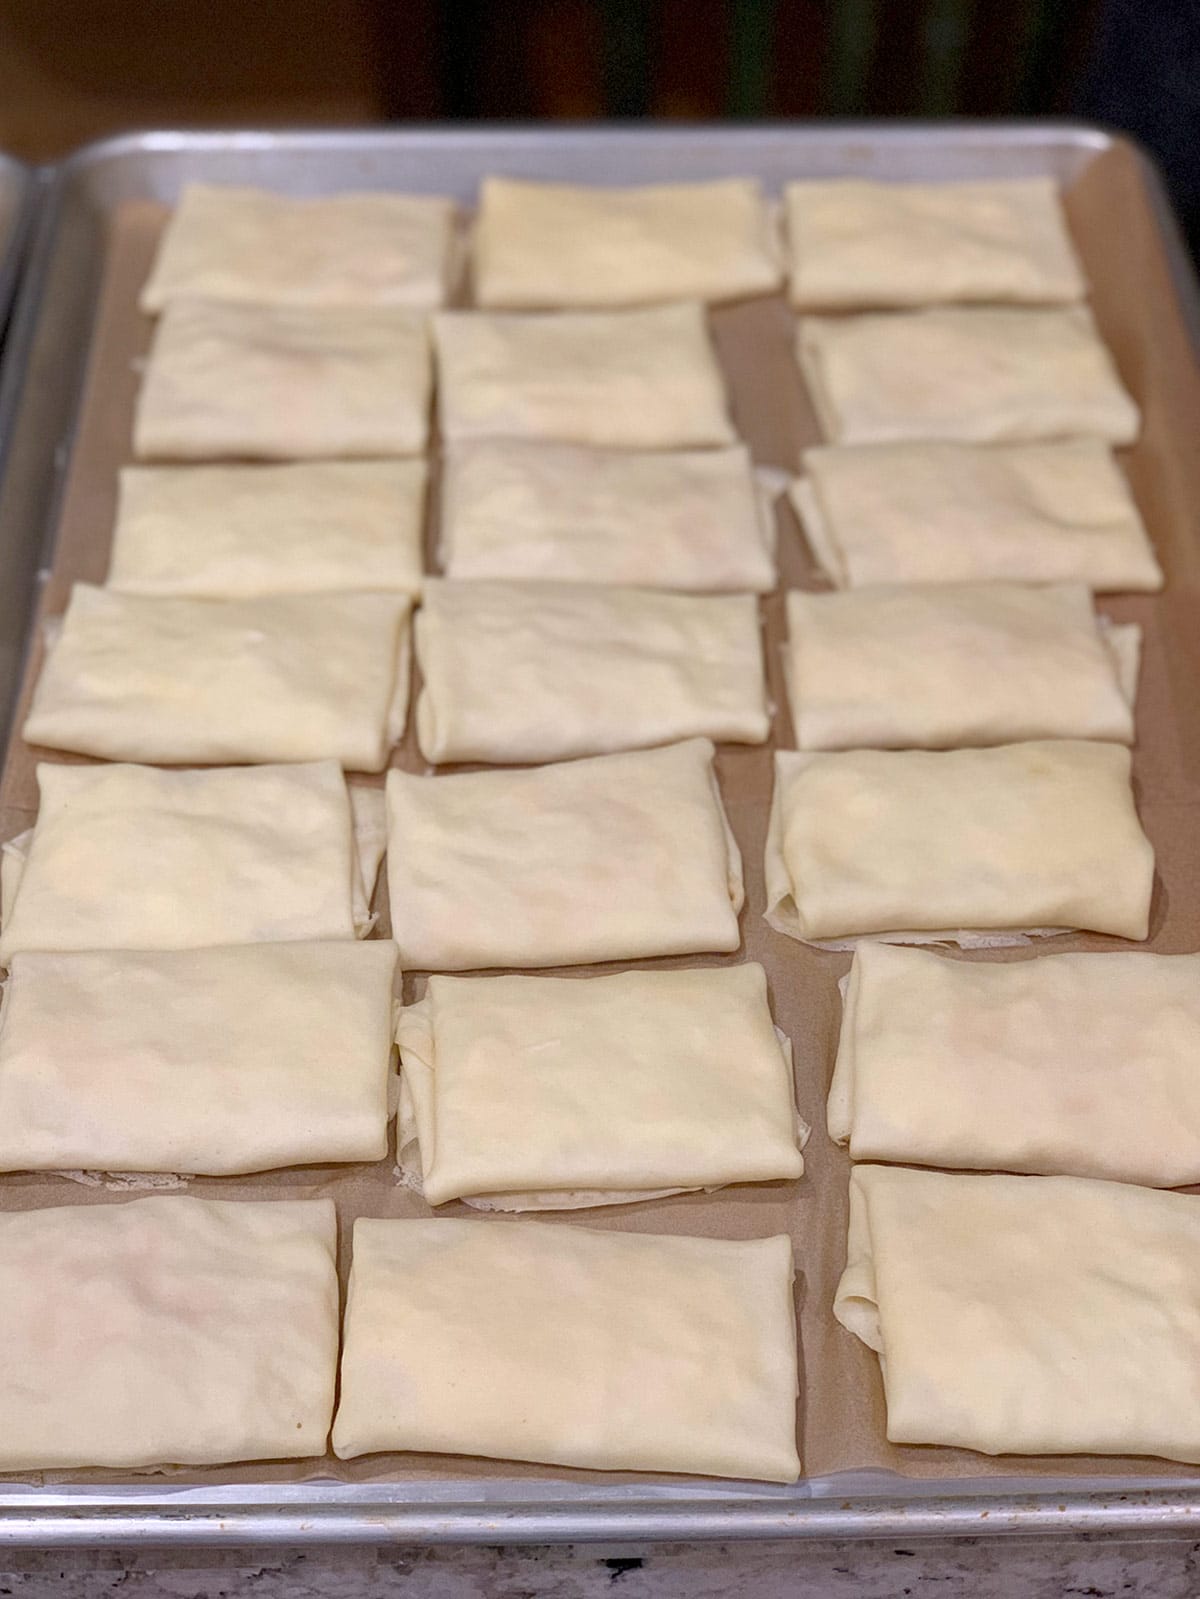 A tray of Sharon's blintzes on parchment, ready to be cooked.